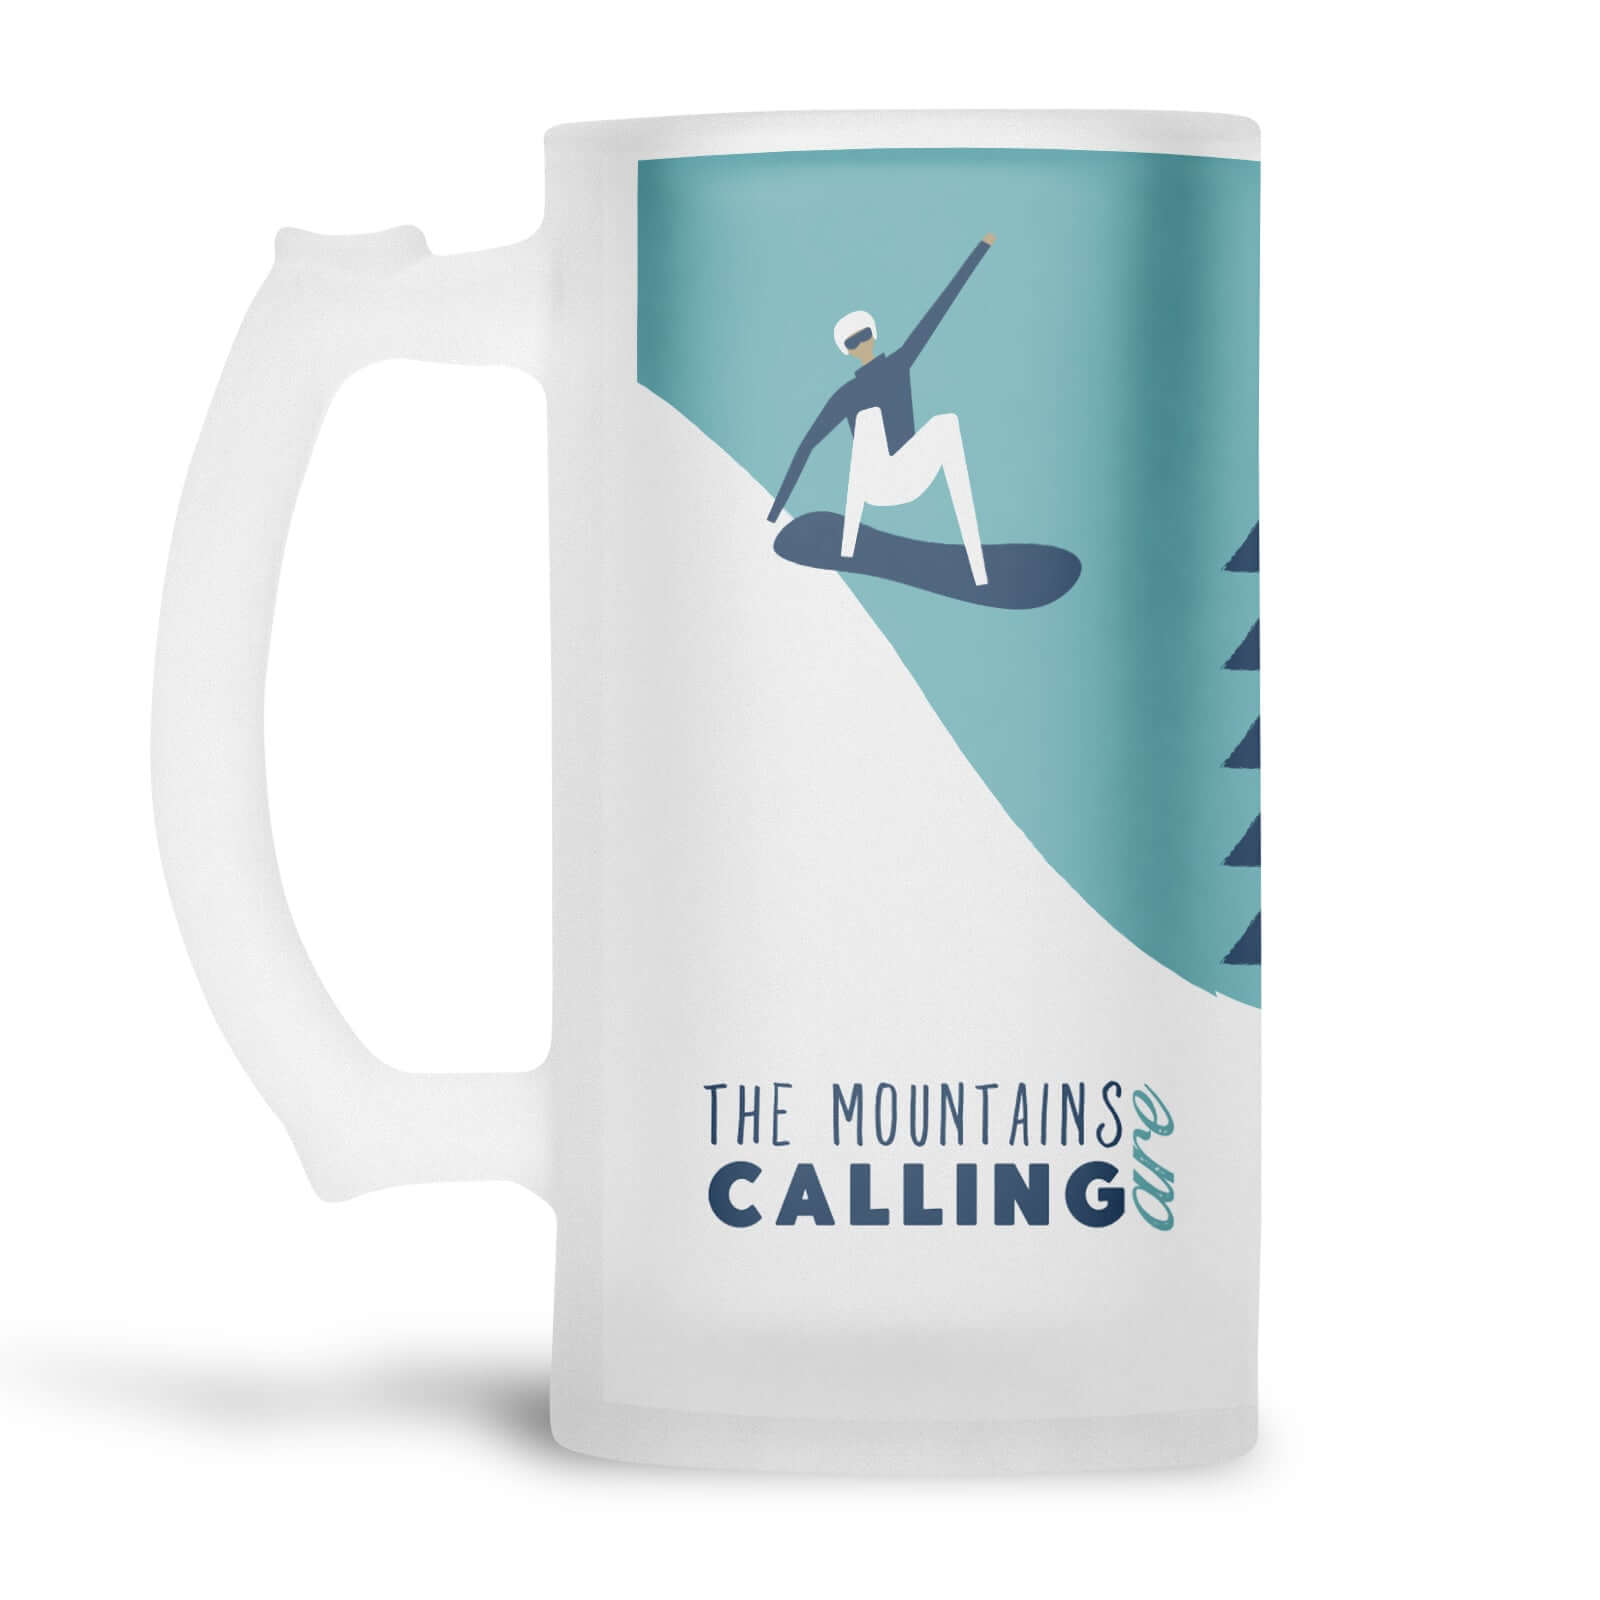 Snowboarding with The mountains are calling slogan printed onto a frosted glass beer stein from Mustard and Gray